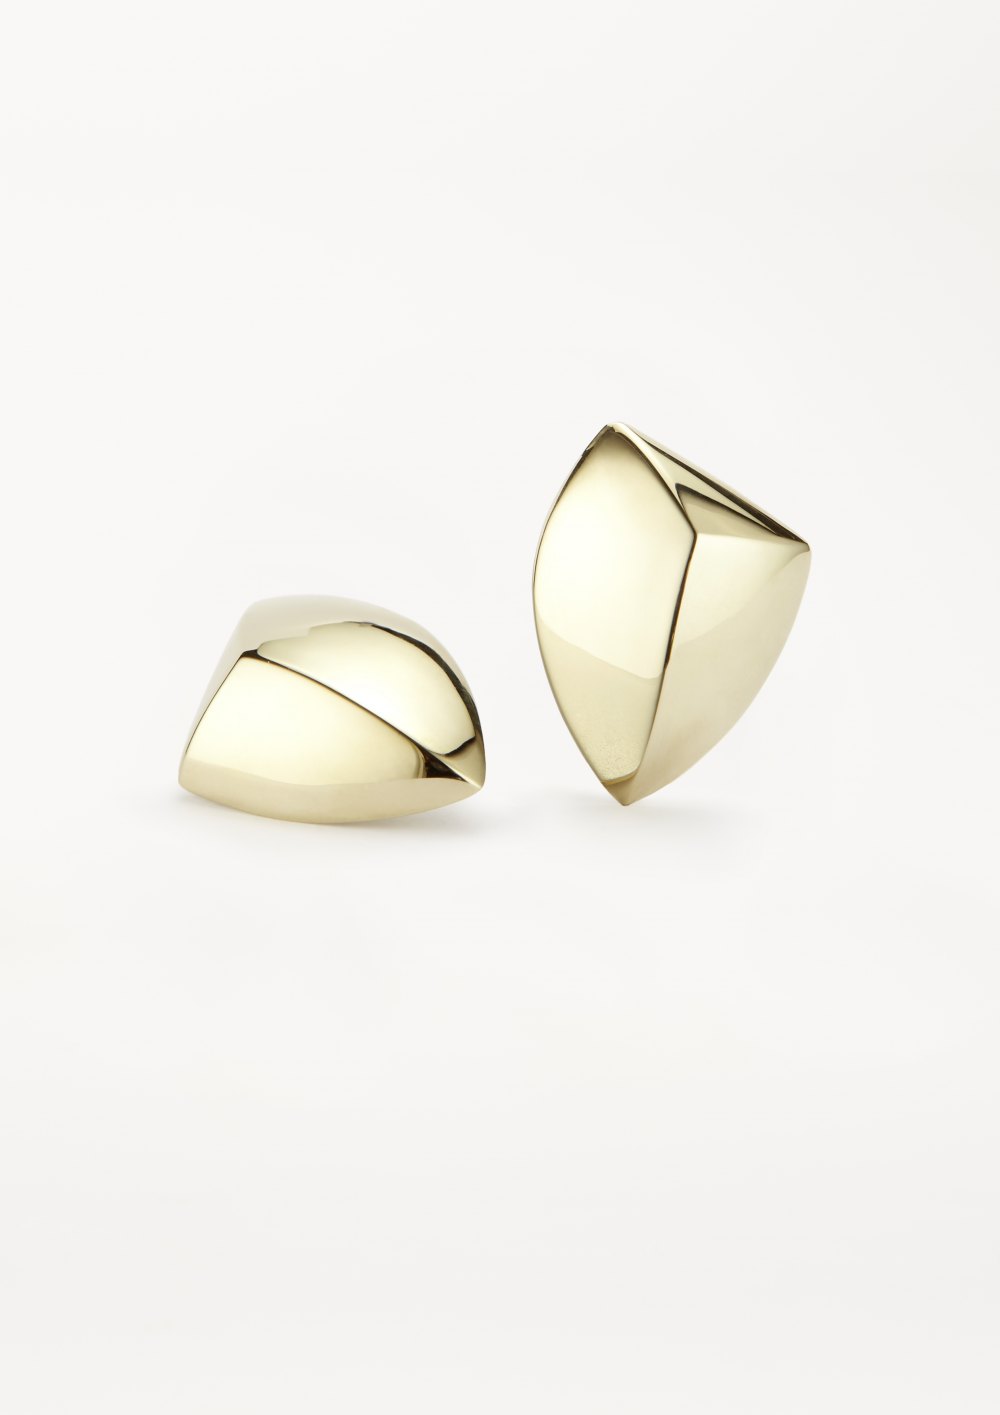 WEARABLE ARCHITECTURE  EARRINGS IN GOLD  BRASS CONTEMPORARY JEWELRY